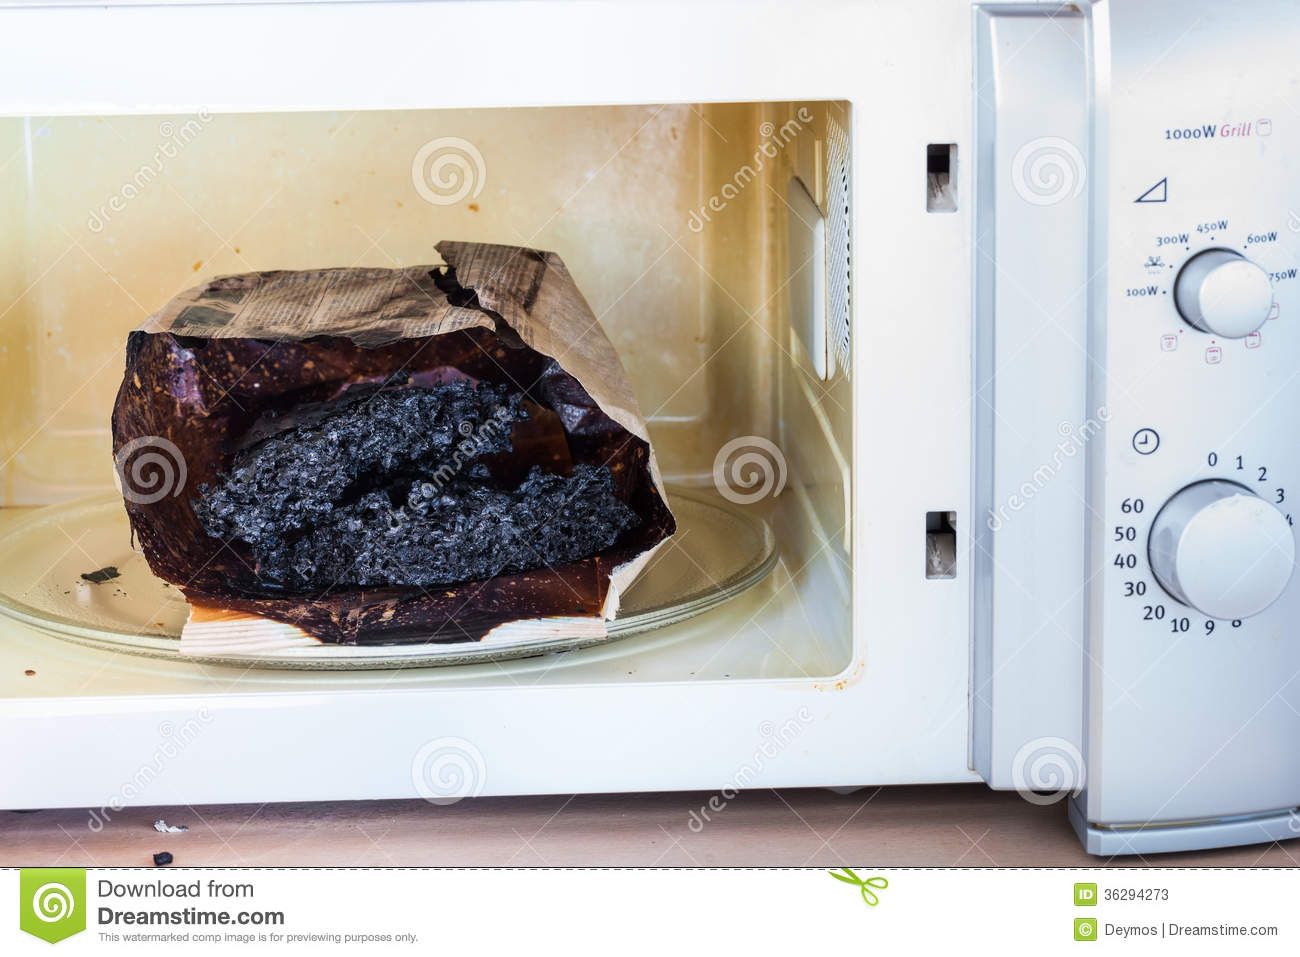     Popcorn In The Greased And Dirty Microwave Oven After The Explosion